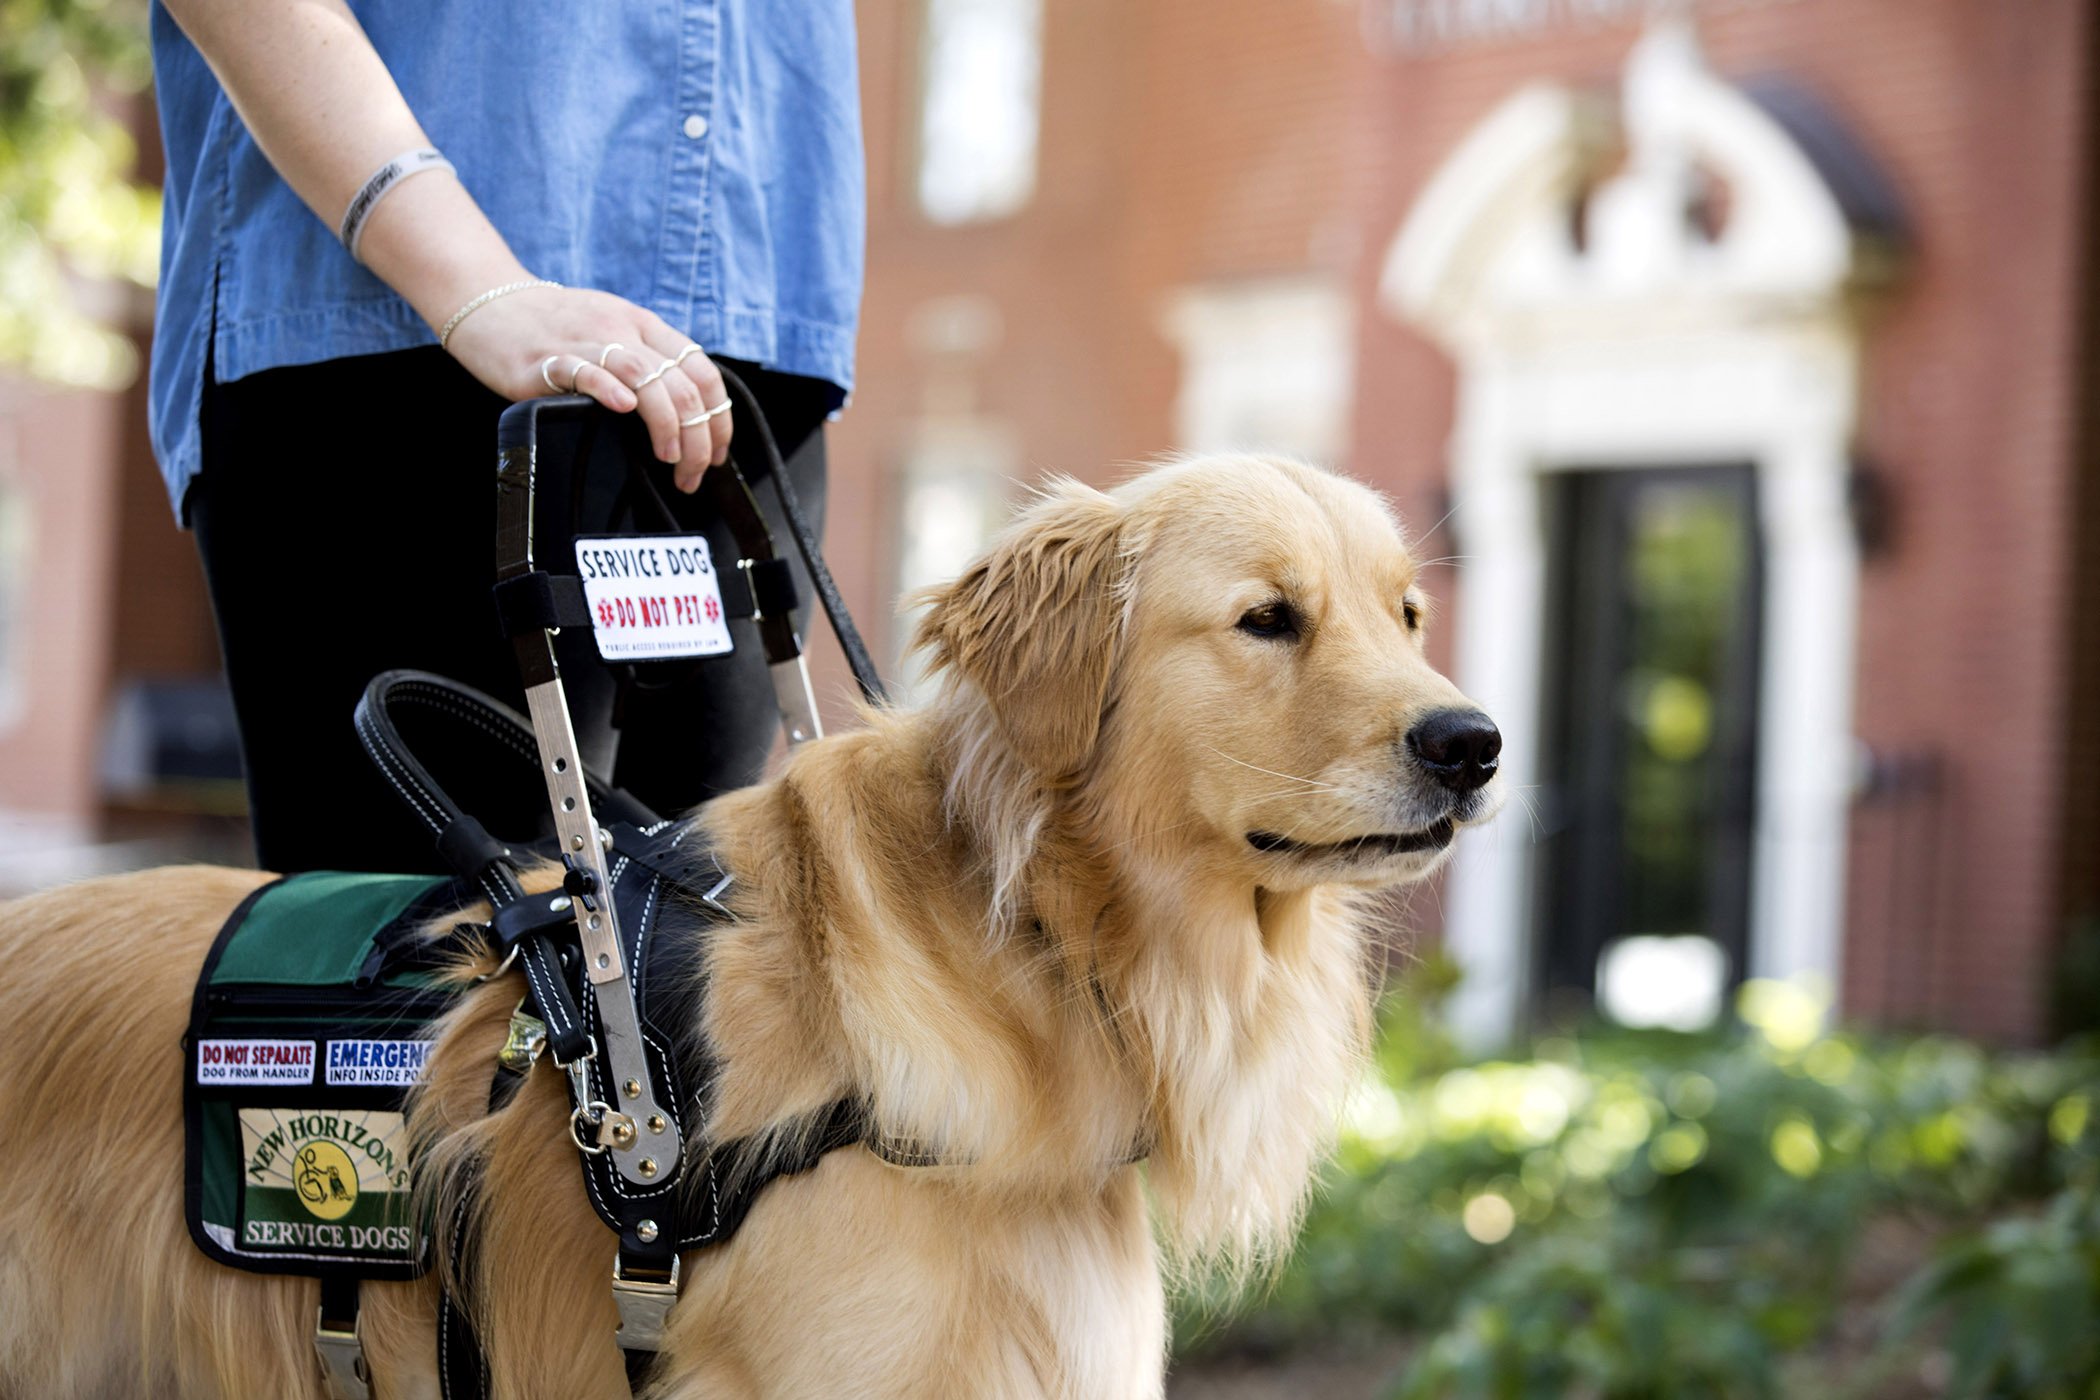 How to get a service dog for anxiety